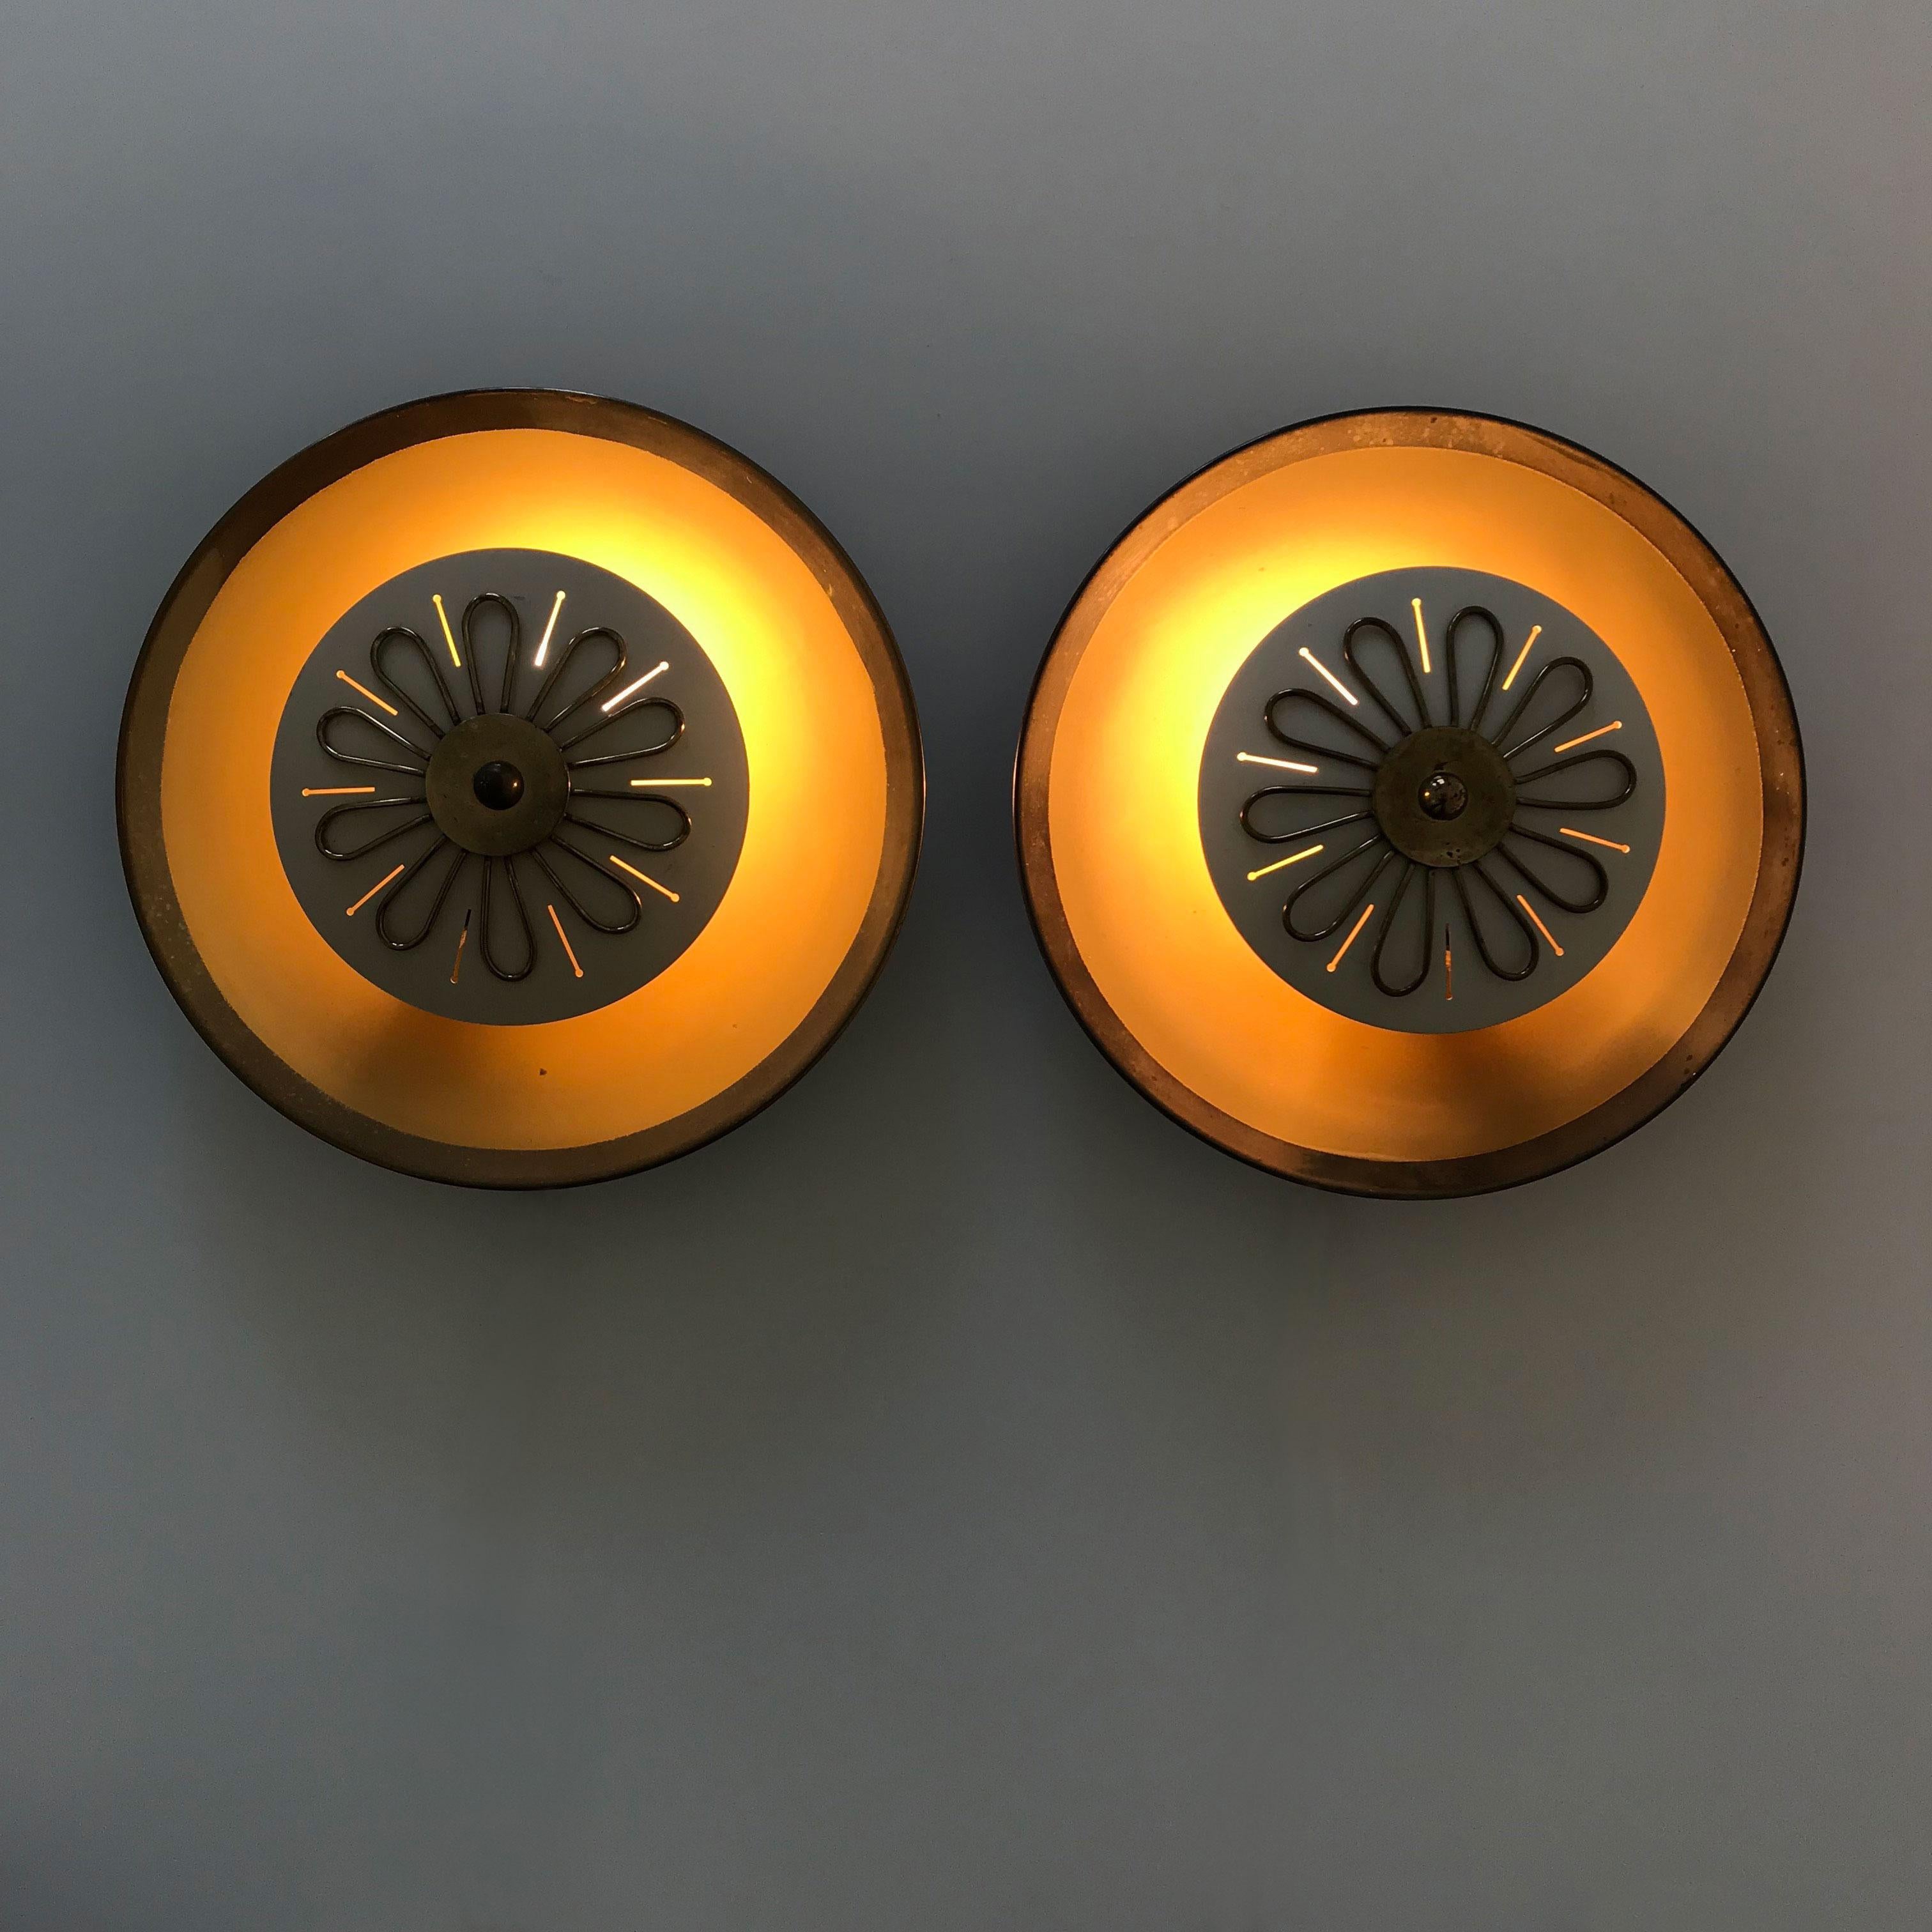 Set of Two Mid-Century Modern Wall Lamps or Flush Mounts by Wila, 1950s, Germany For Sale 3